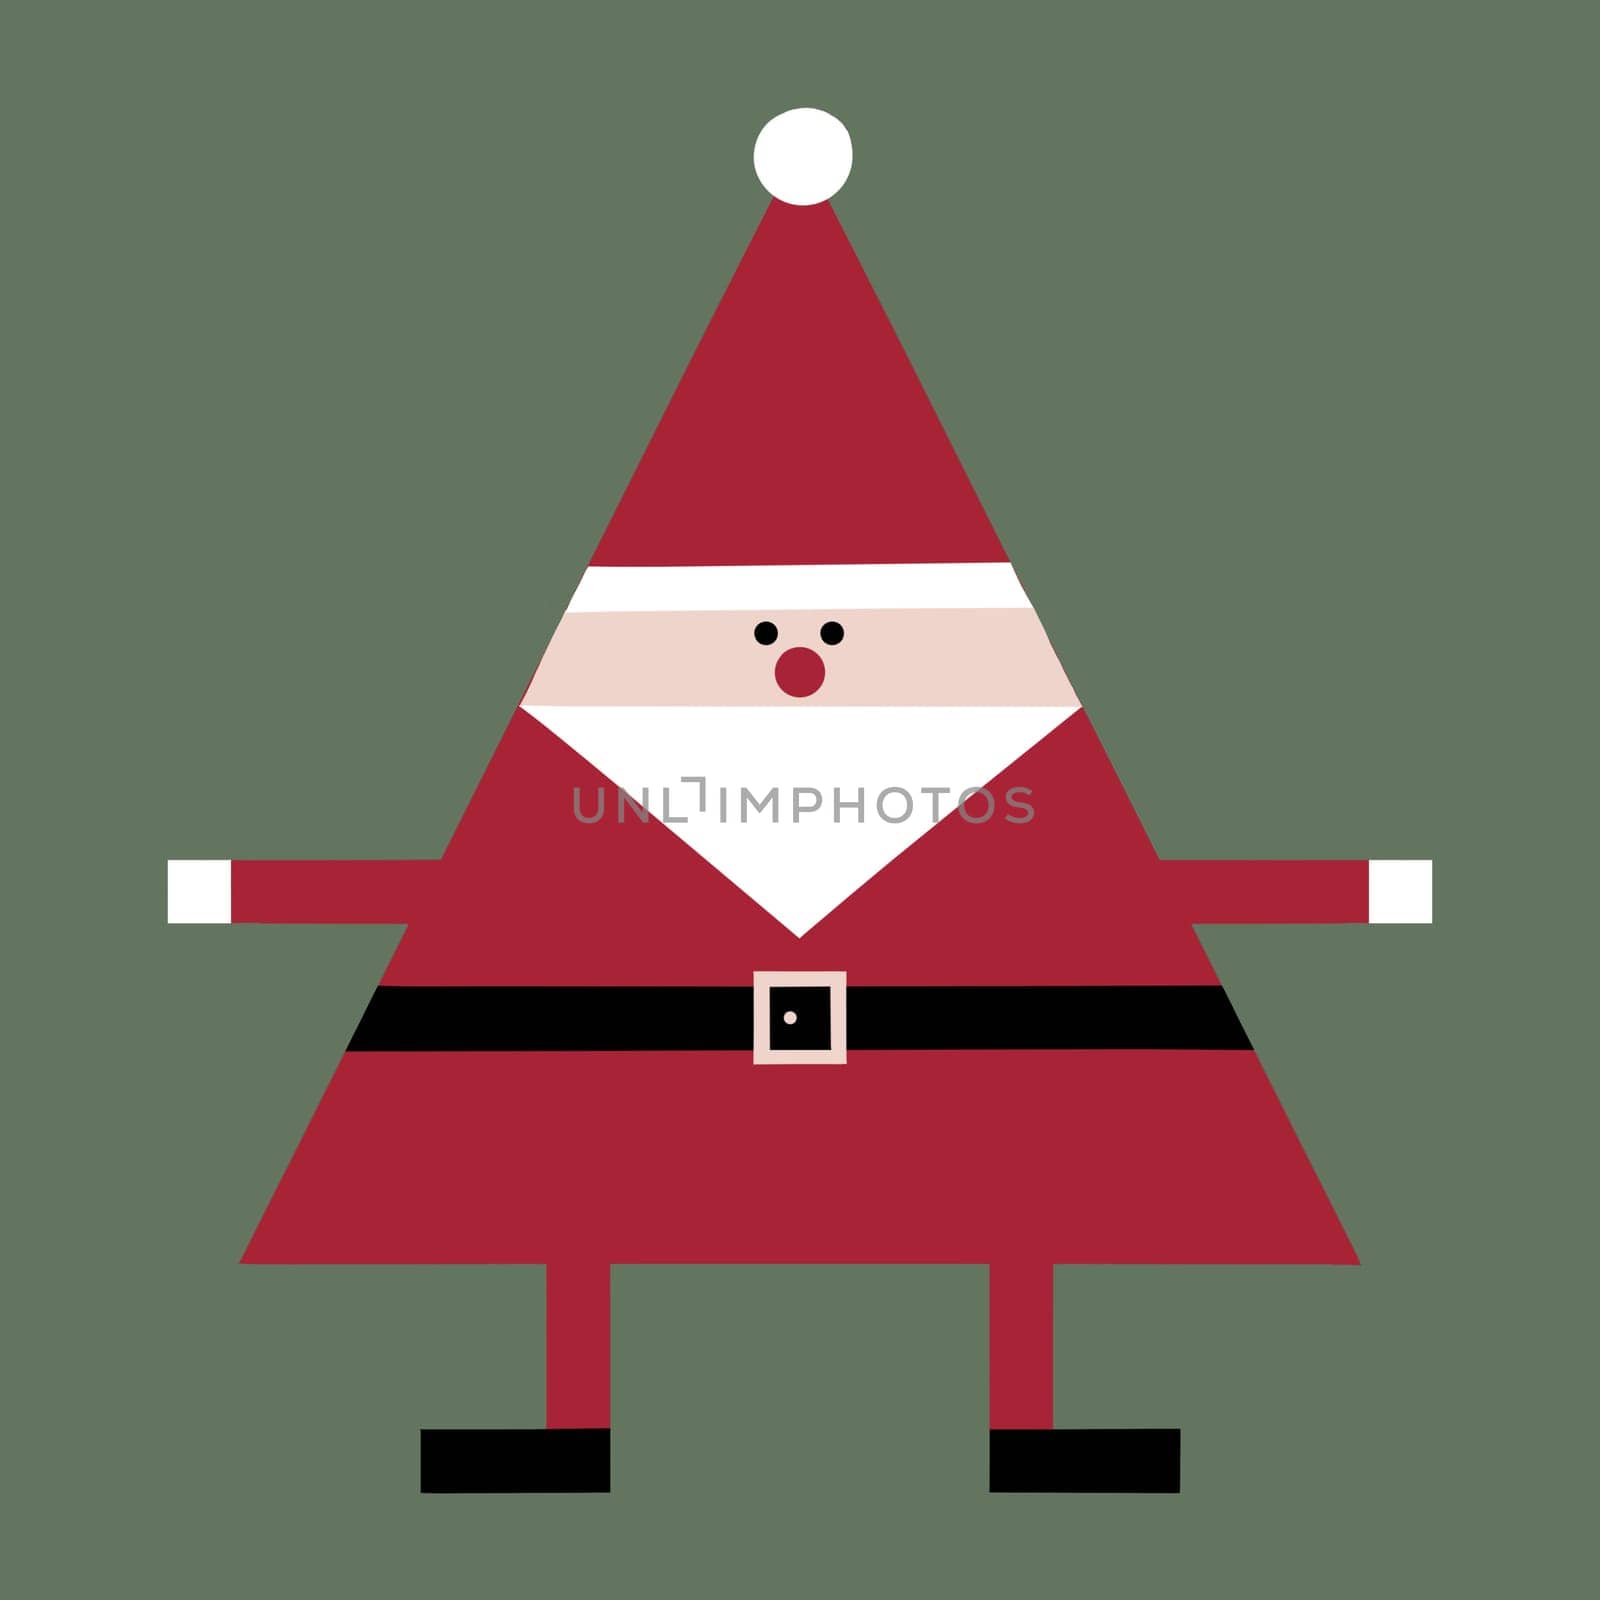 Quirky geometric Santa illustration. Quirky Father Christmas. Geometry. Triangular shaped Santa. Modern Christmas. Sleek Santa. Christmas Tree shaped Sant Claus.